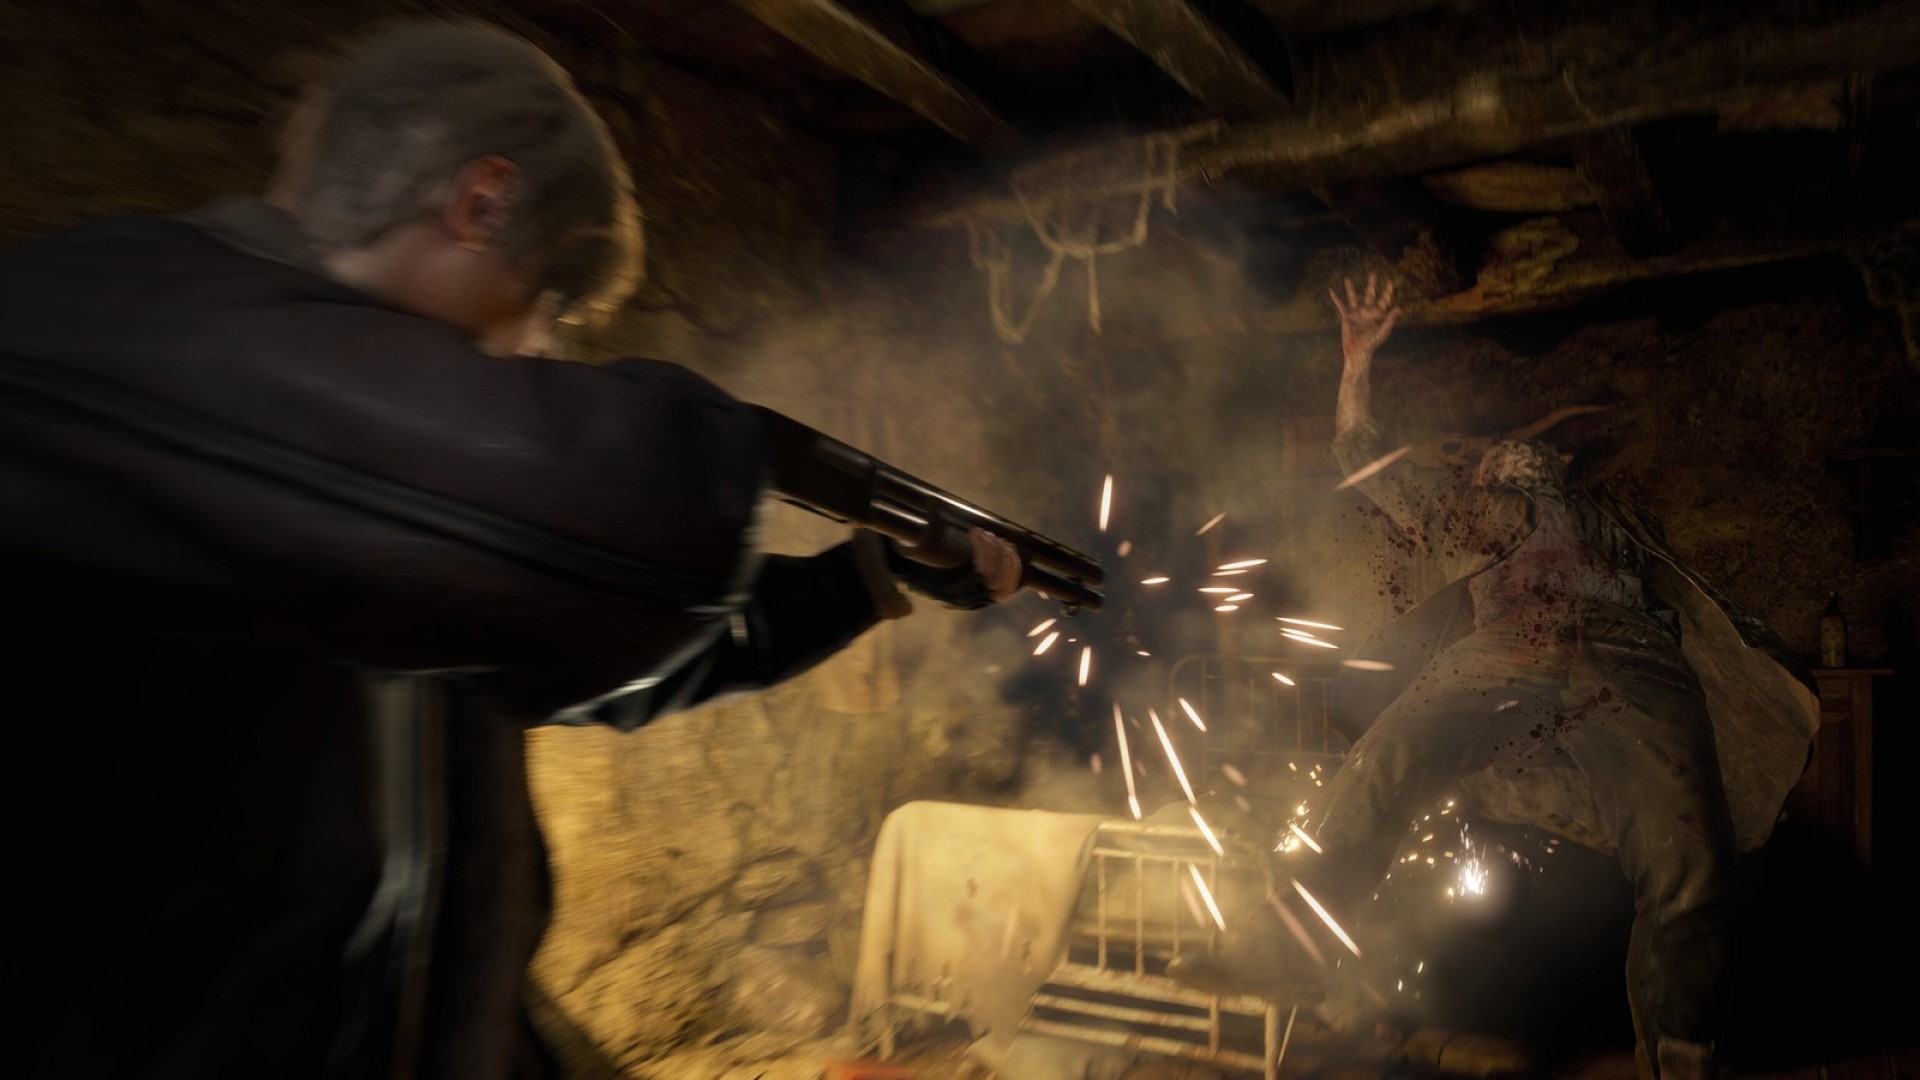 Resident Evil 4 Remake Has Added New Achievements on Steam, Potentially Hinting at Imminent DLC